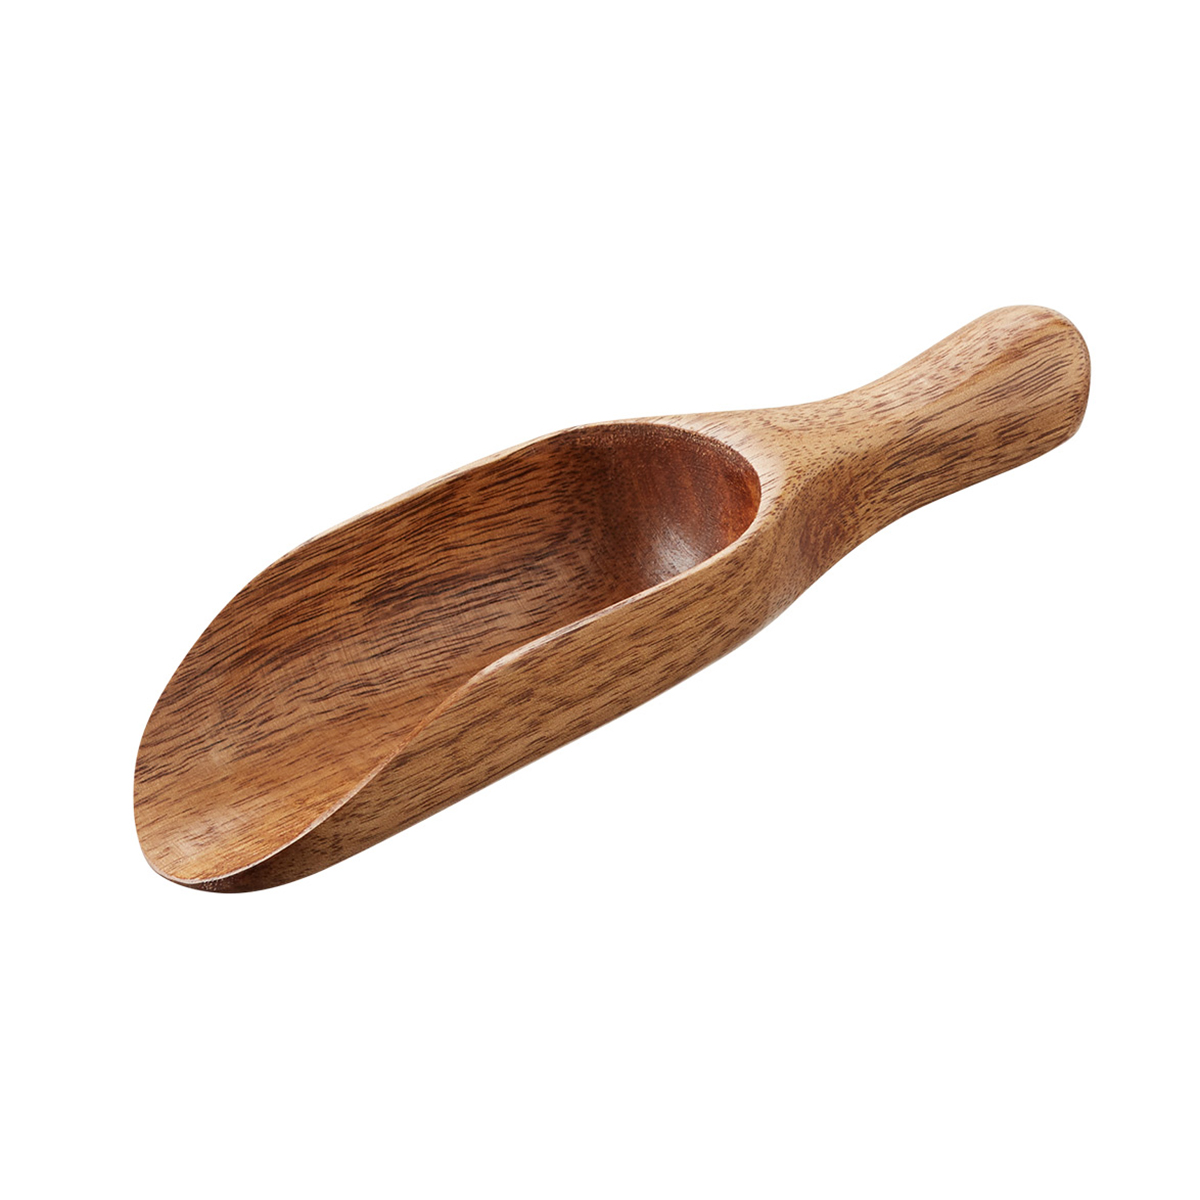 https://www.containerstore.com/catalogimages/517183/10096532-TCS-small-wooden-scoop-acac.jpg